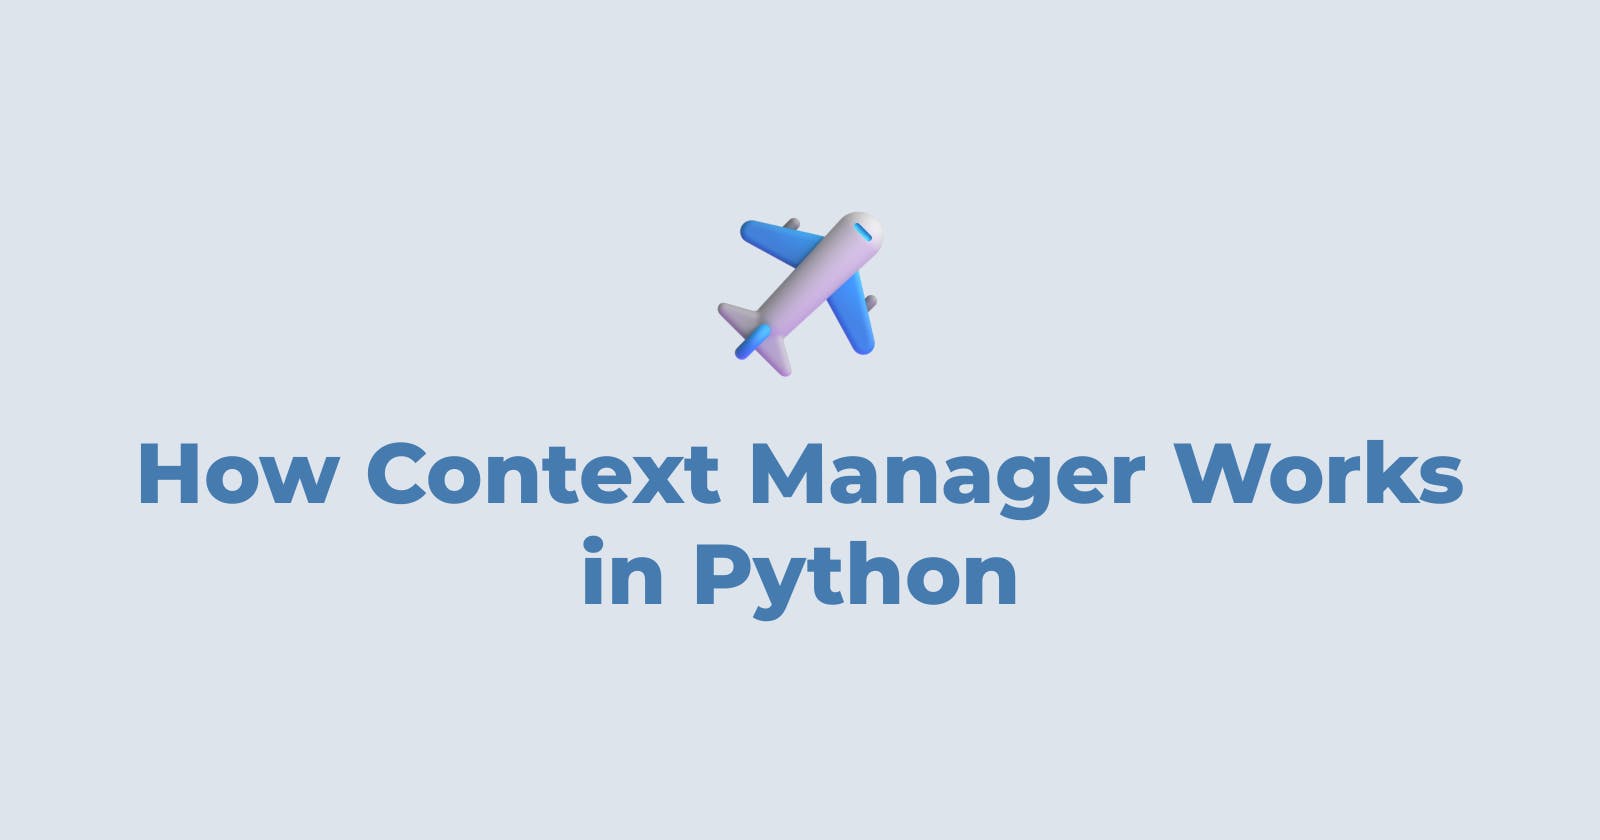 How Context Manager Works in Python